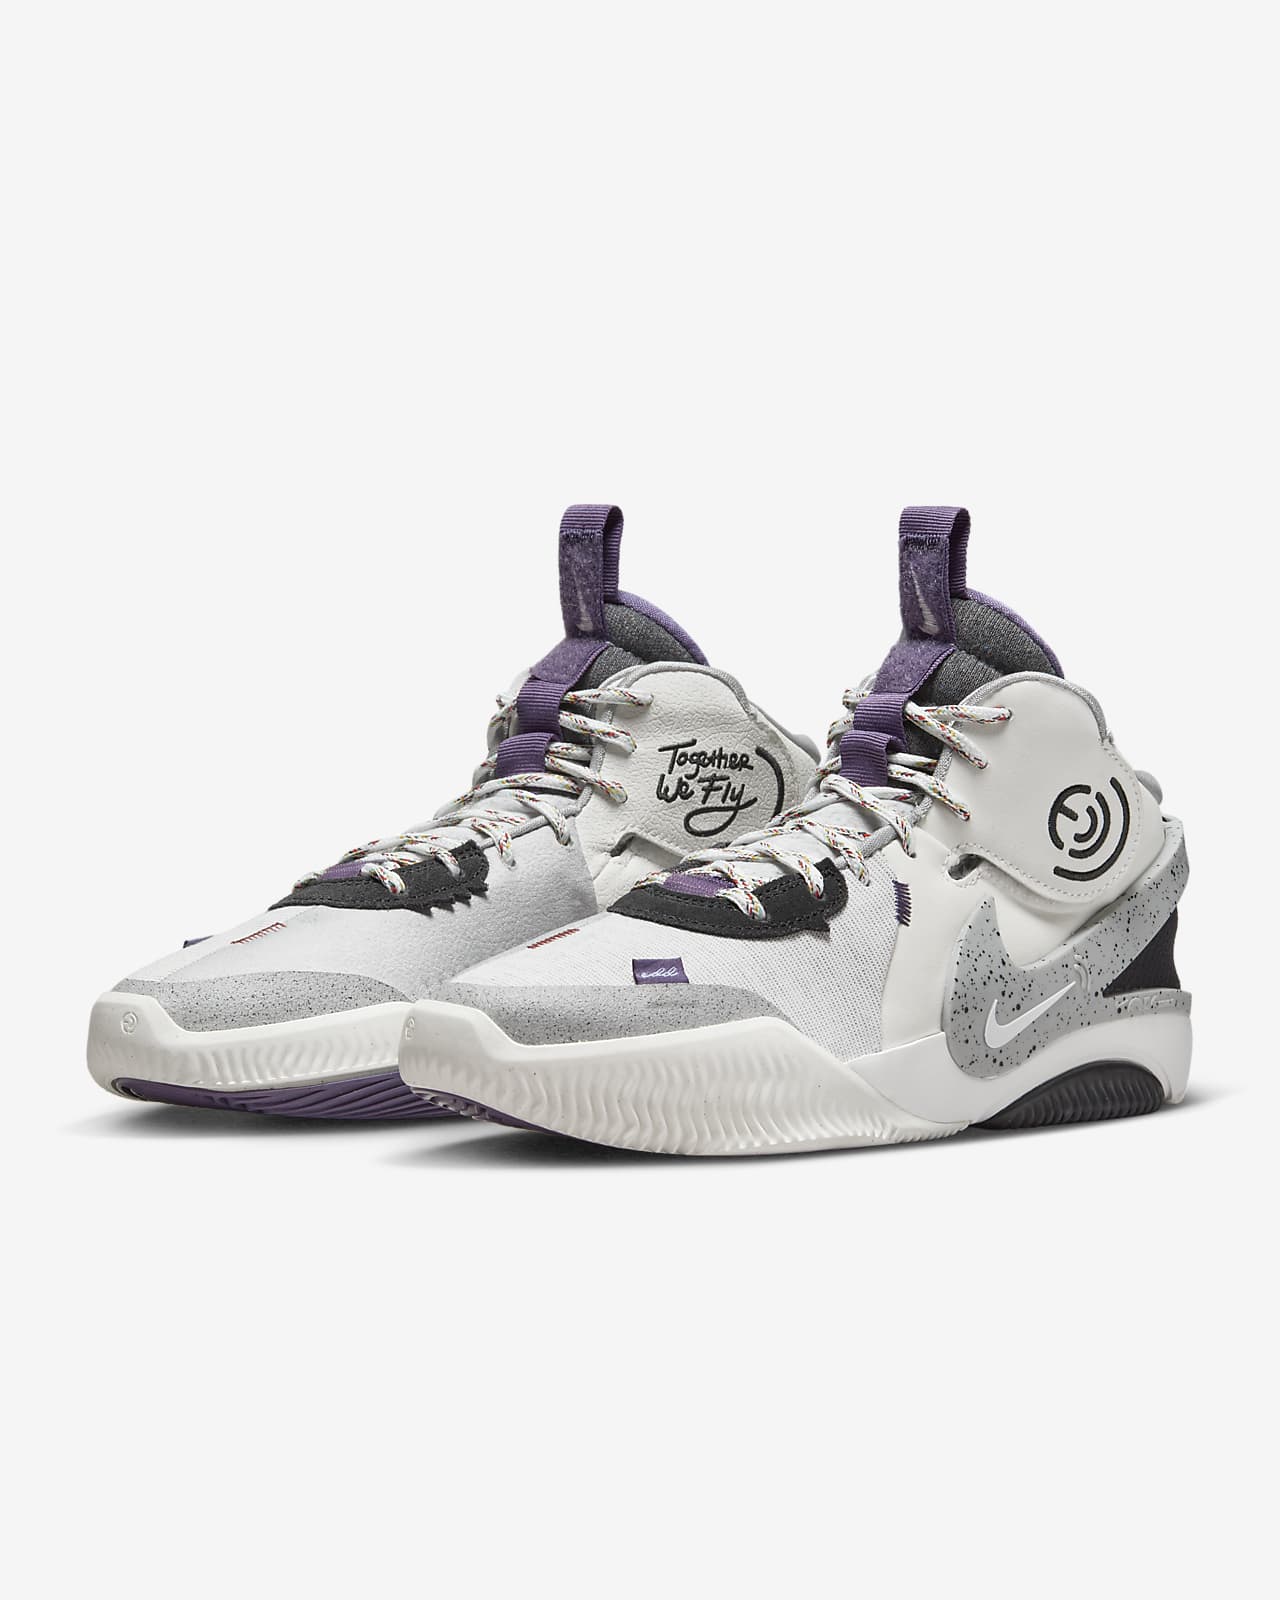 Nike Air Deldon 'Together We Fly' Basketball Shoes. Nike SK